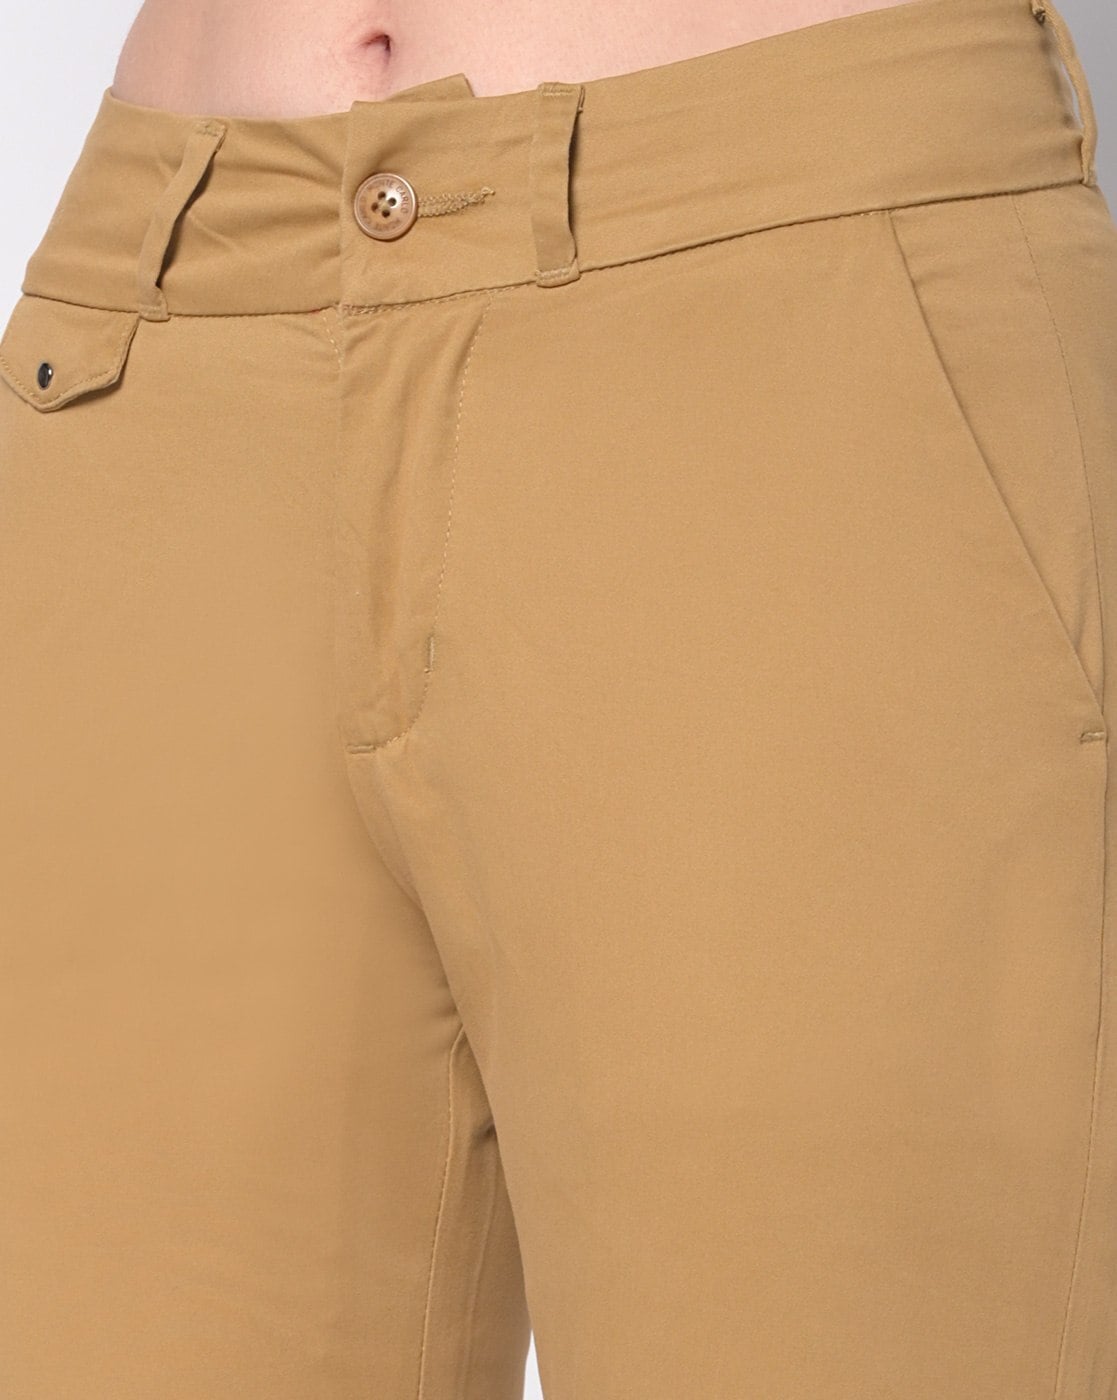 Monte Carlo Trousers & Lowers for Men sale - discounted price | FASHIOLA  INDIA